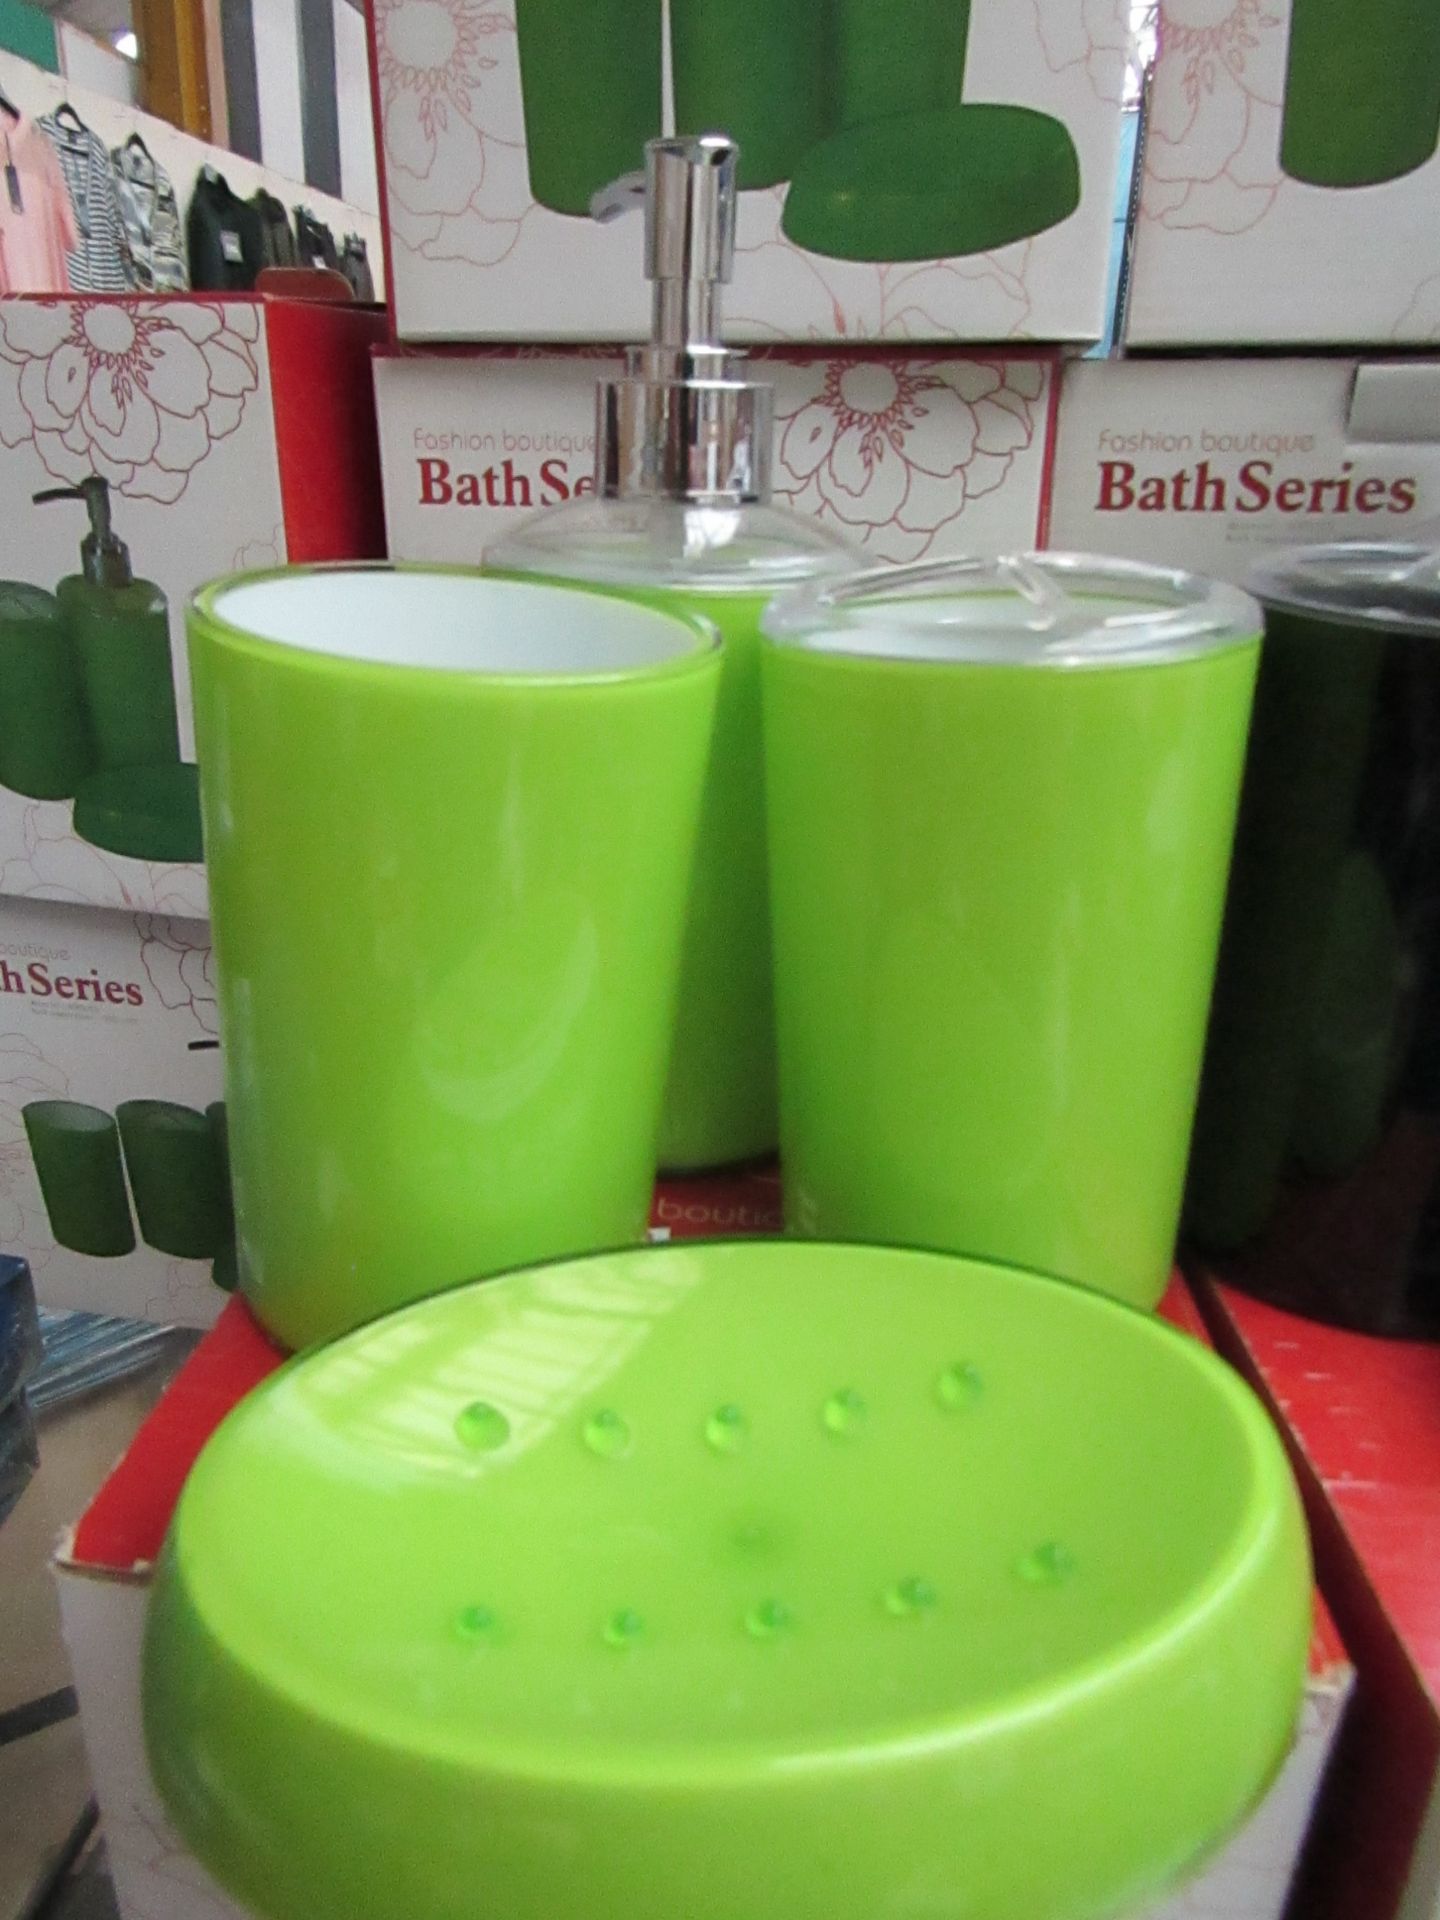 Fashion Boutique 4 piece Bathroom set, new in box (see image for colour)